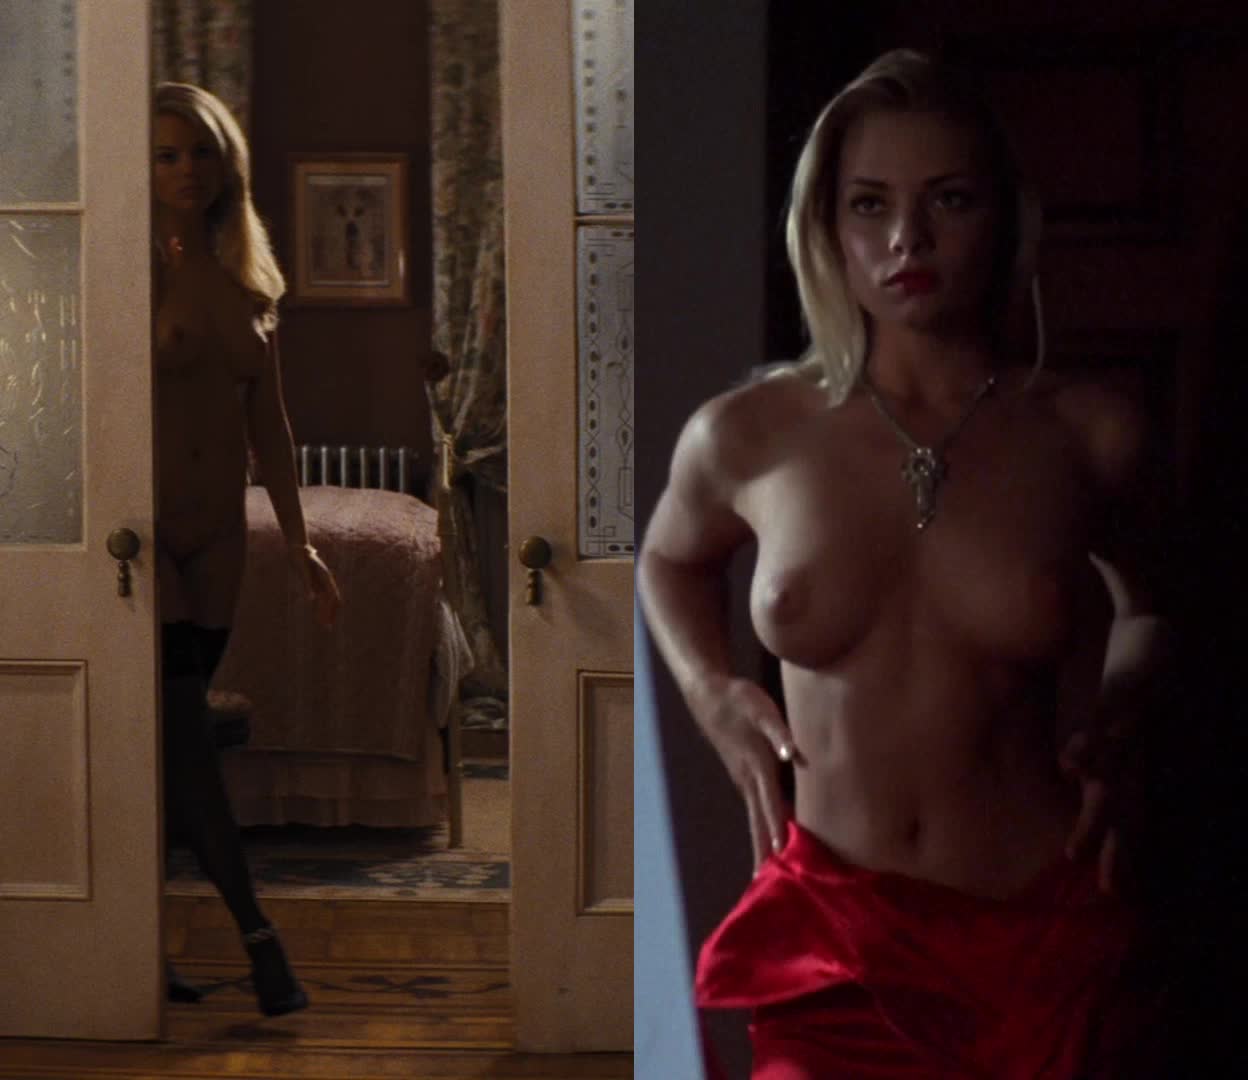 Nude celebs: Margot Robbie full frontal in The Wolf of Wall Street...